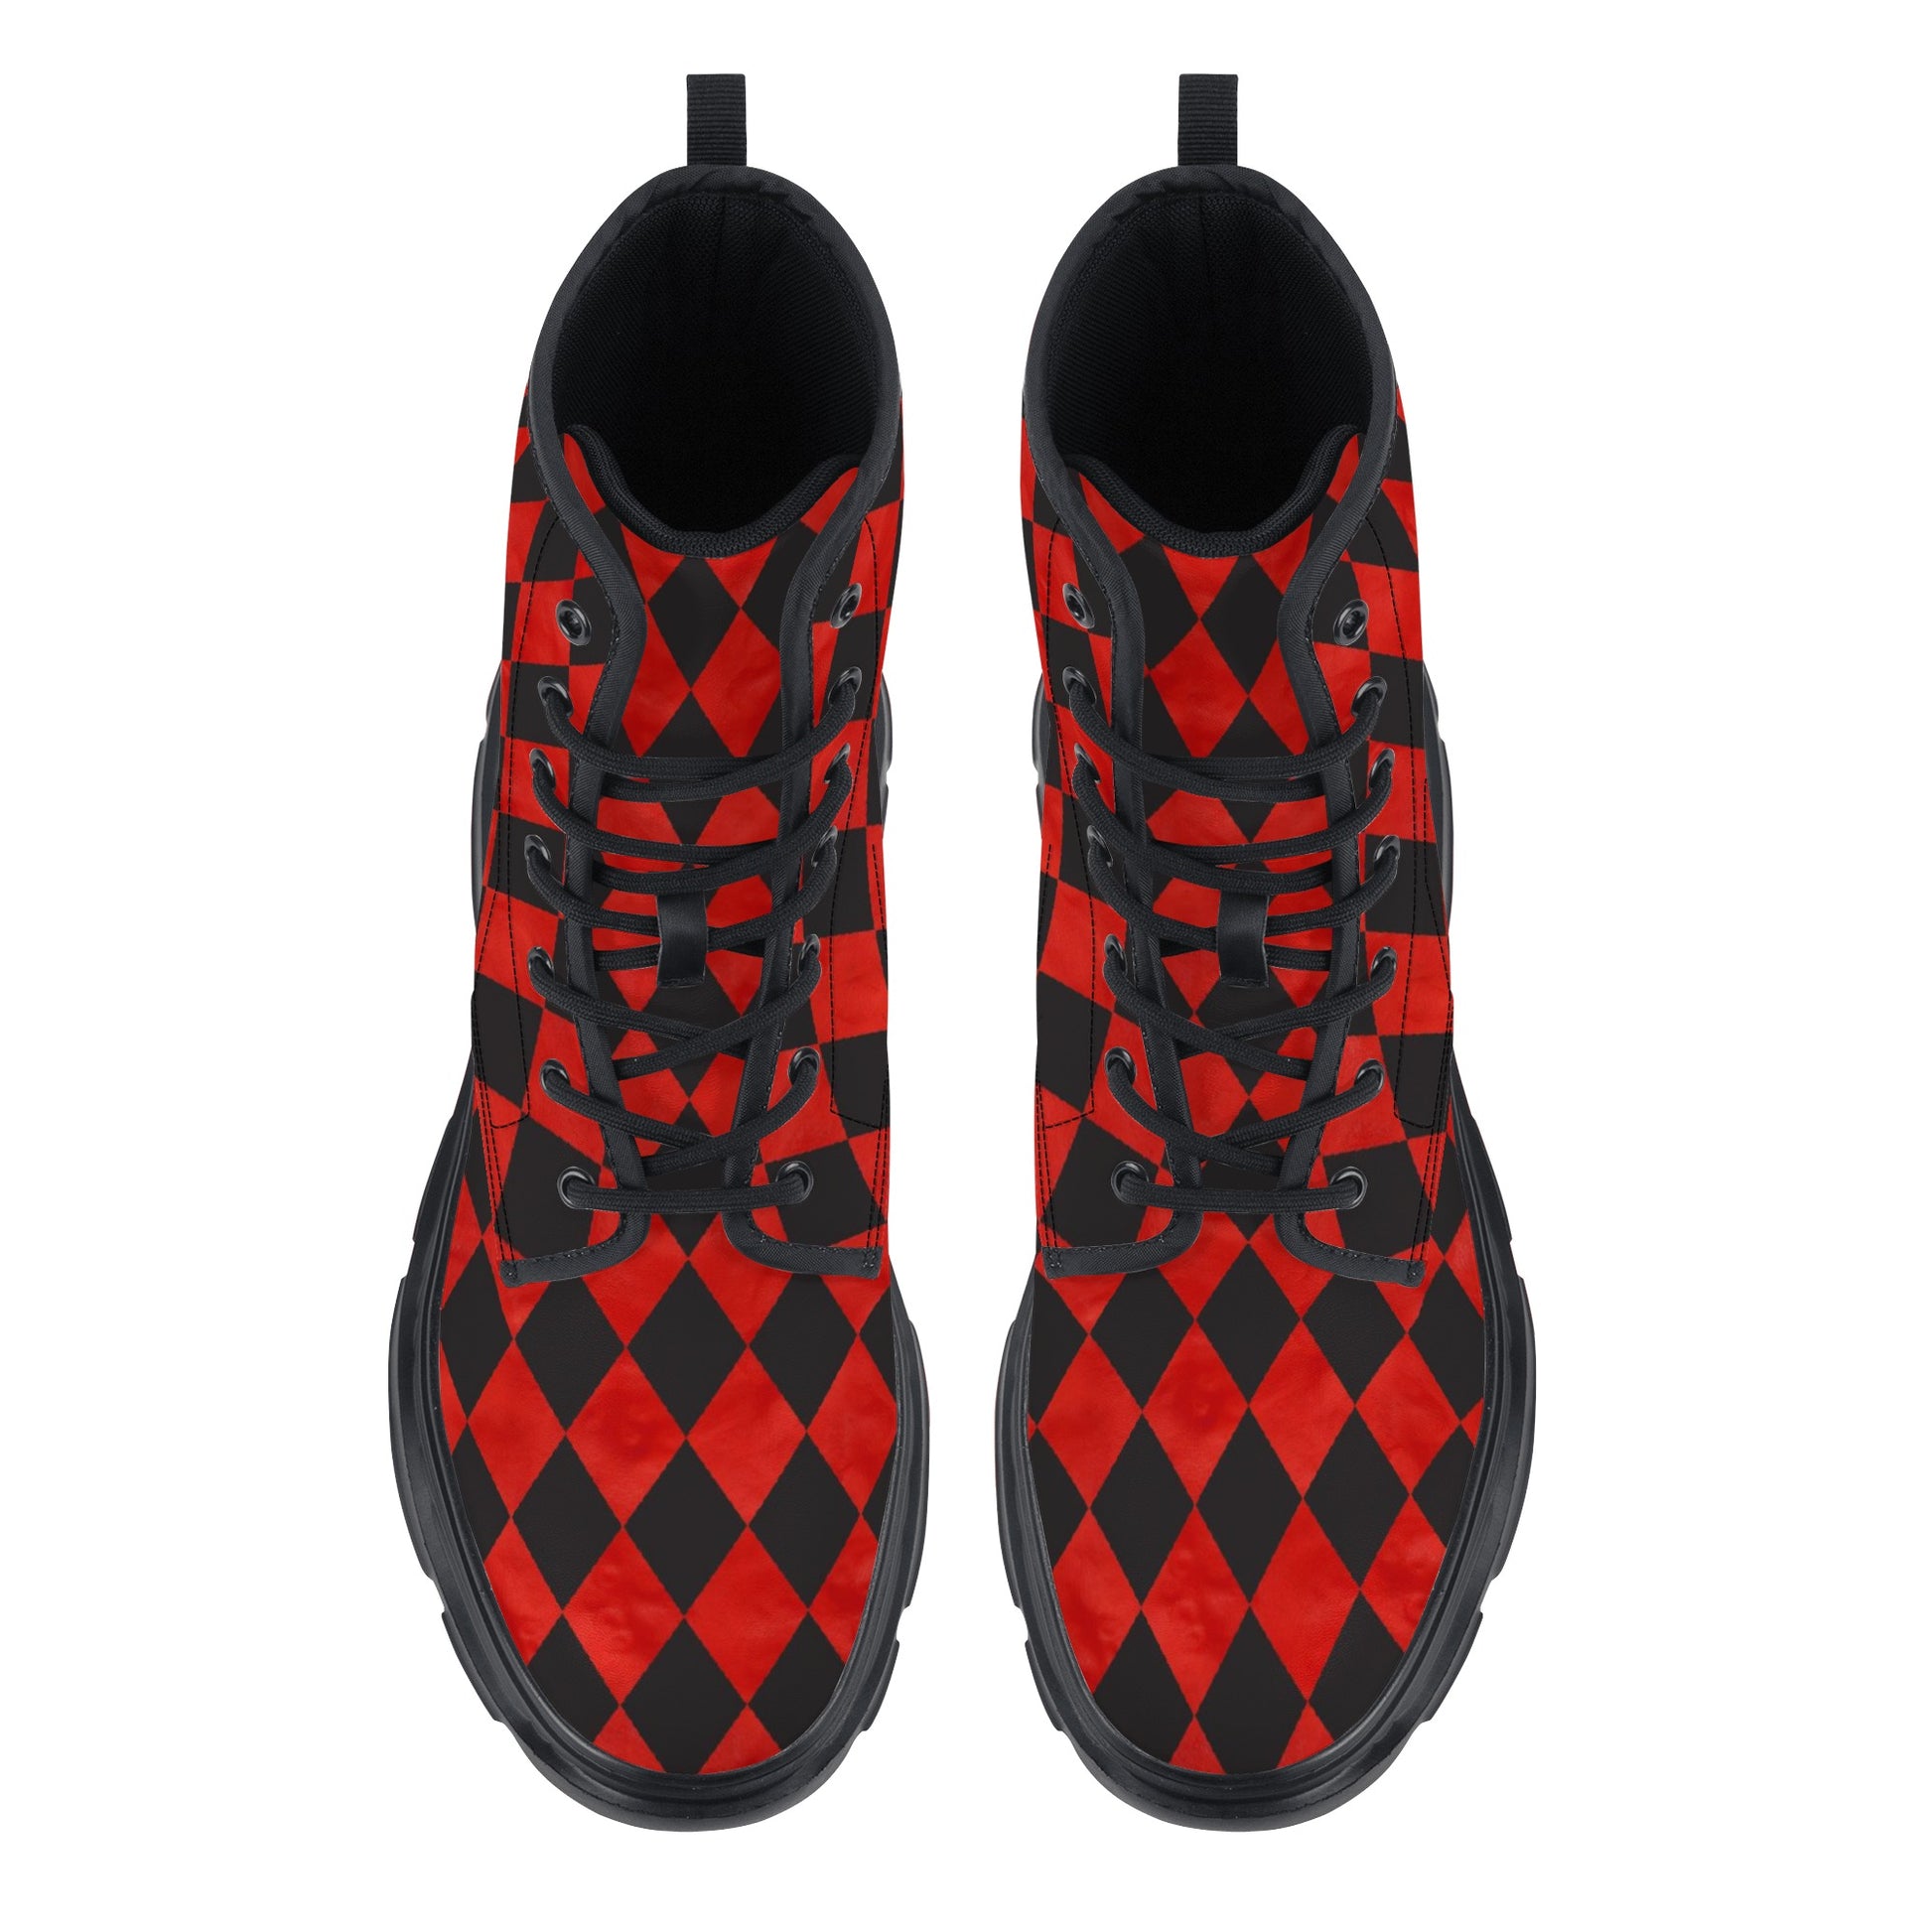 Alice Red Harlequin Chunky Boots-ShopImaginable.com